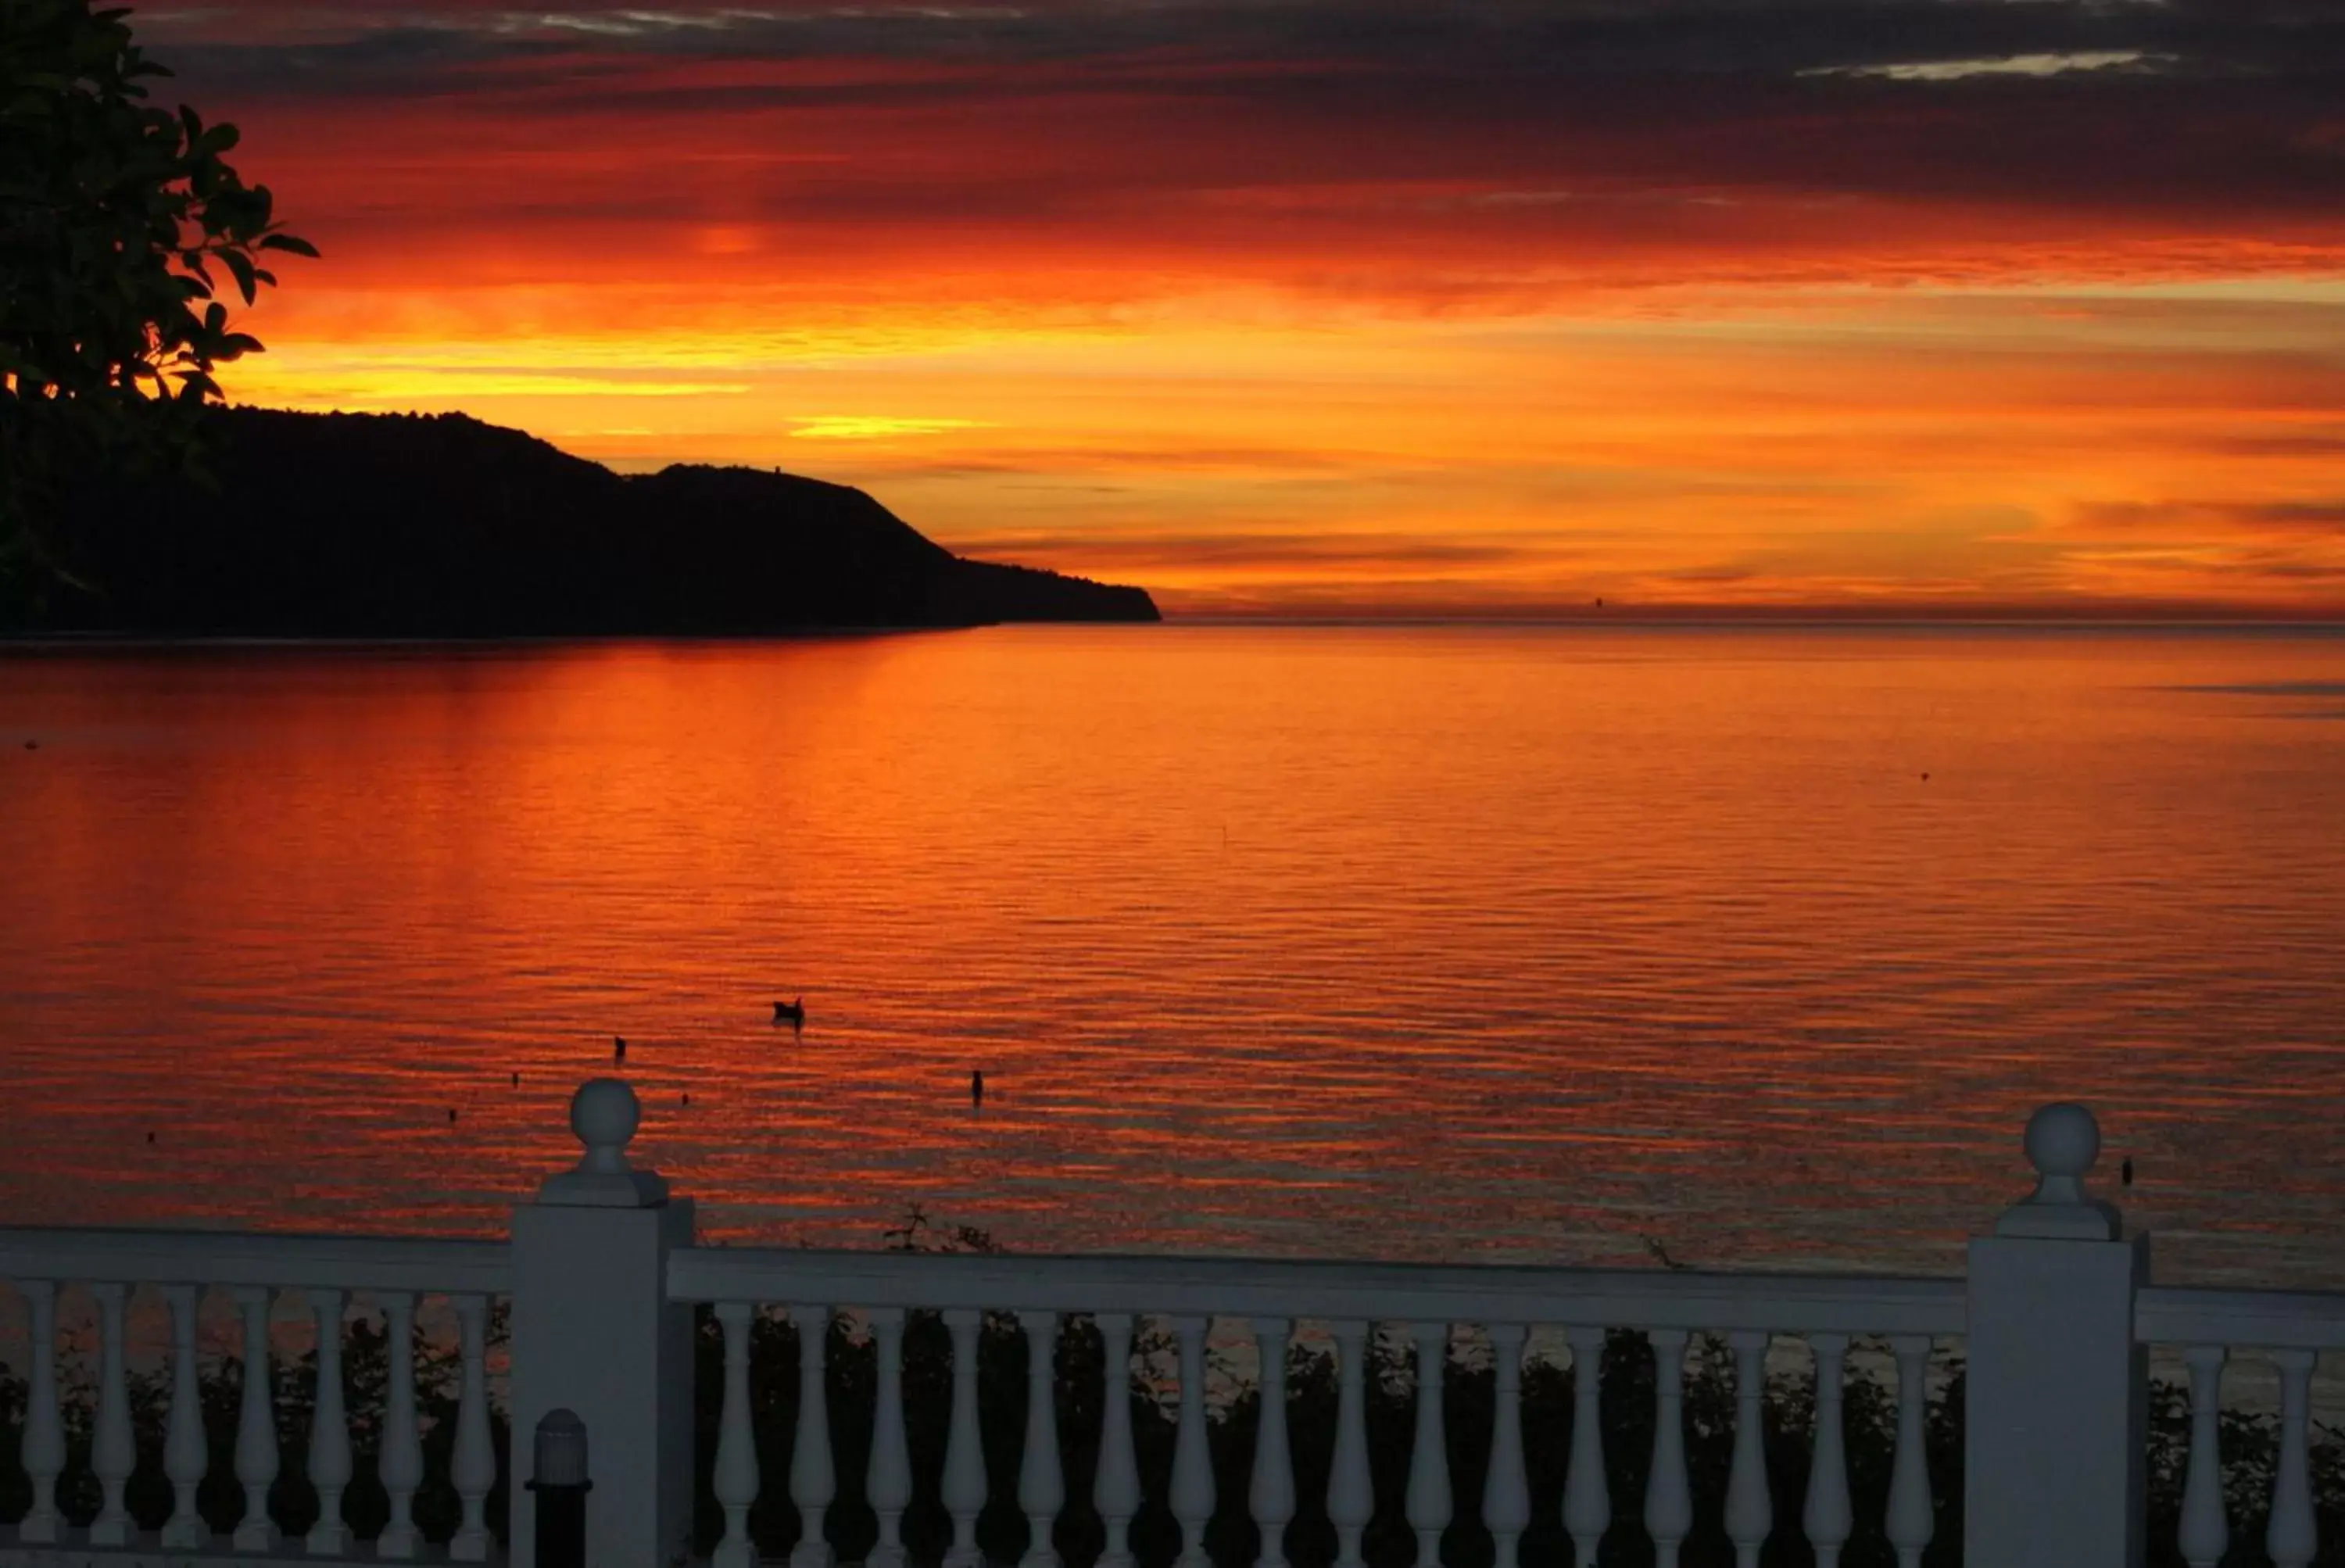 View (from property/room), Sunrise/Sunset in Parador de Nerja